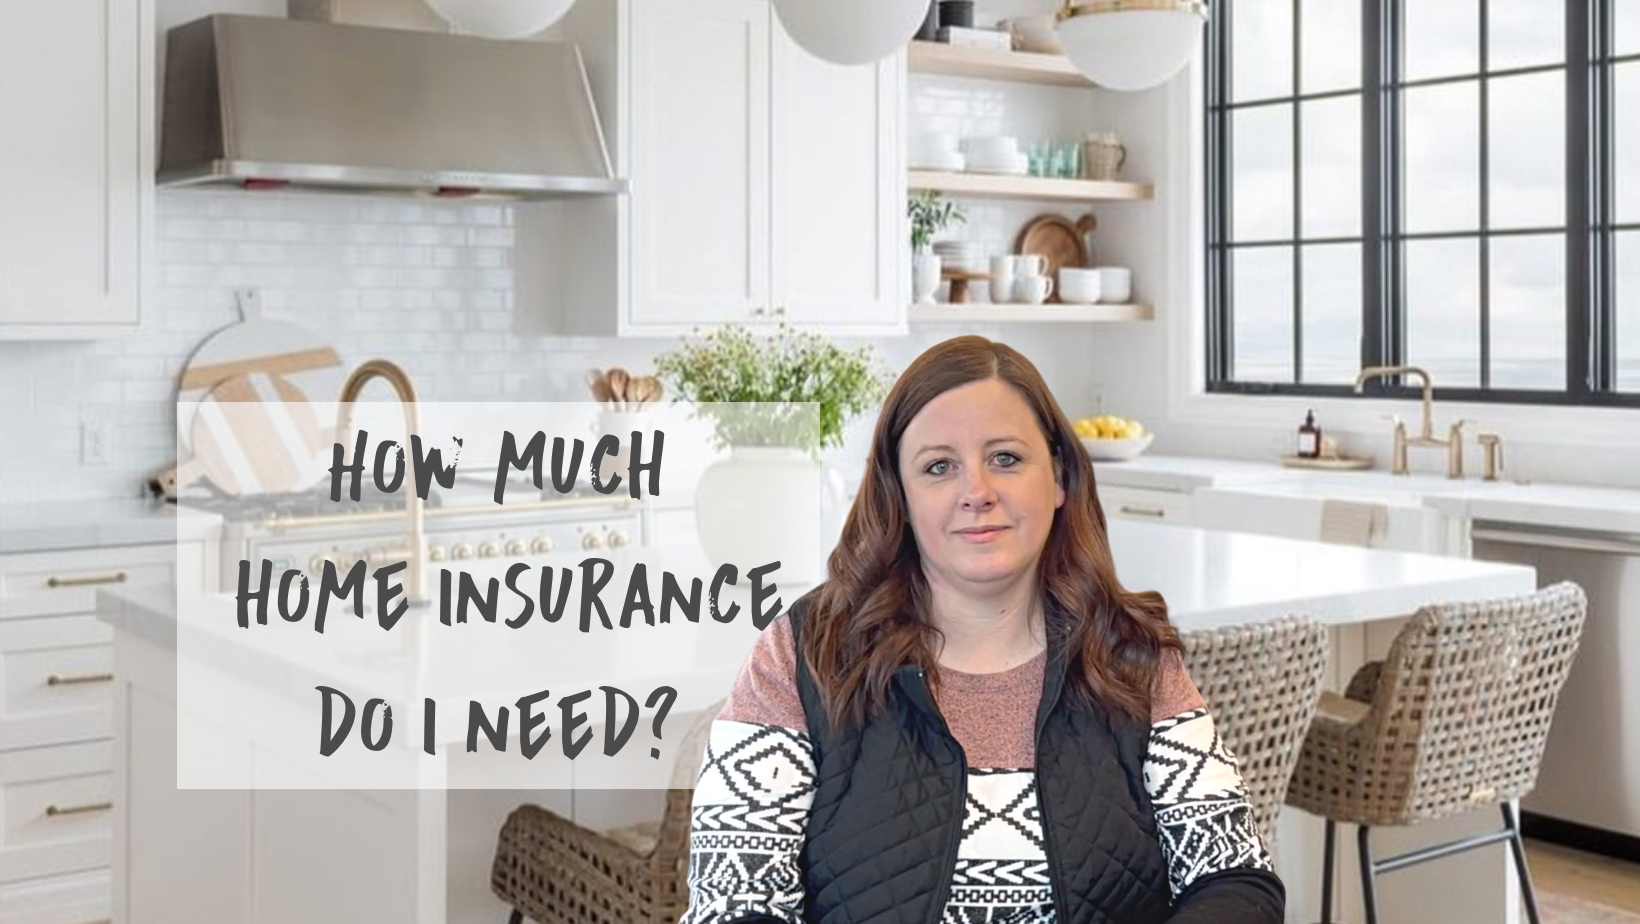 Video tutorial with Kristina explaining how much home insurance someone may need